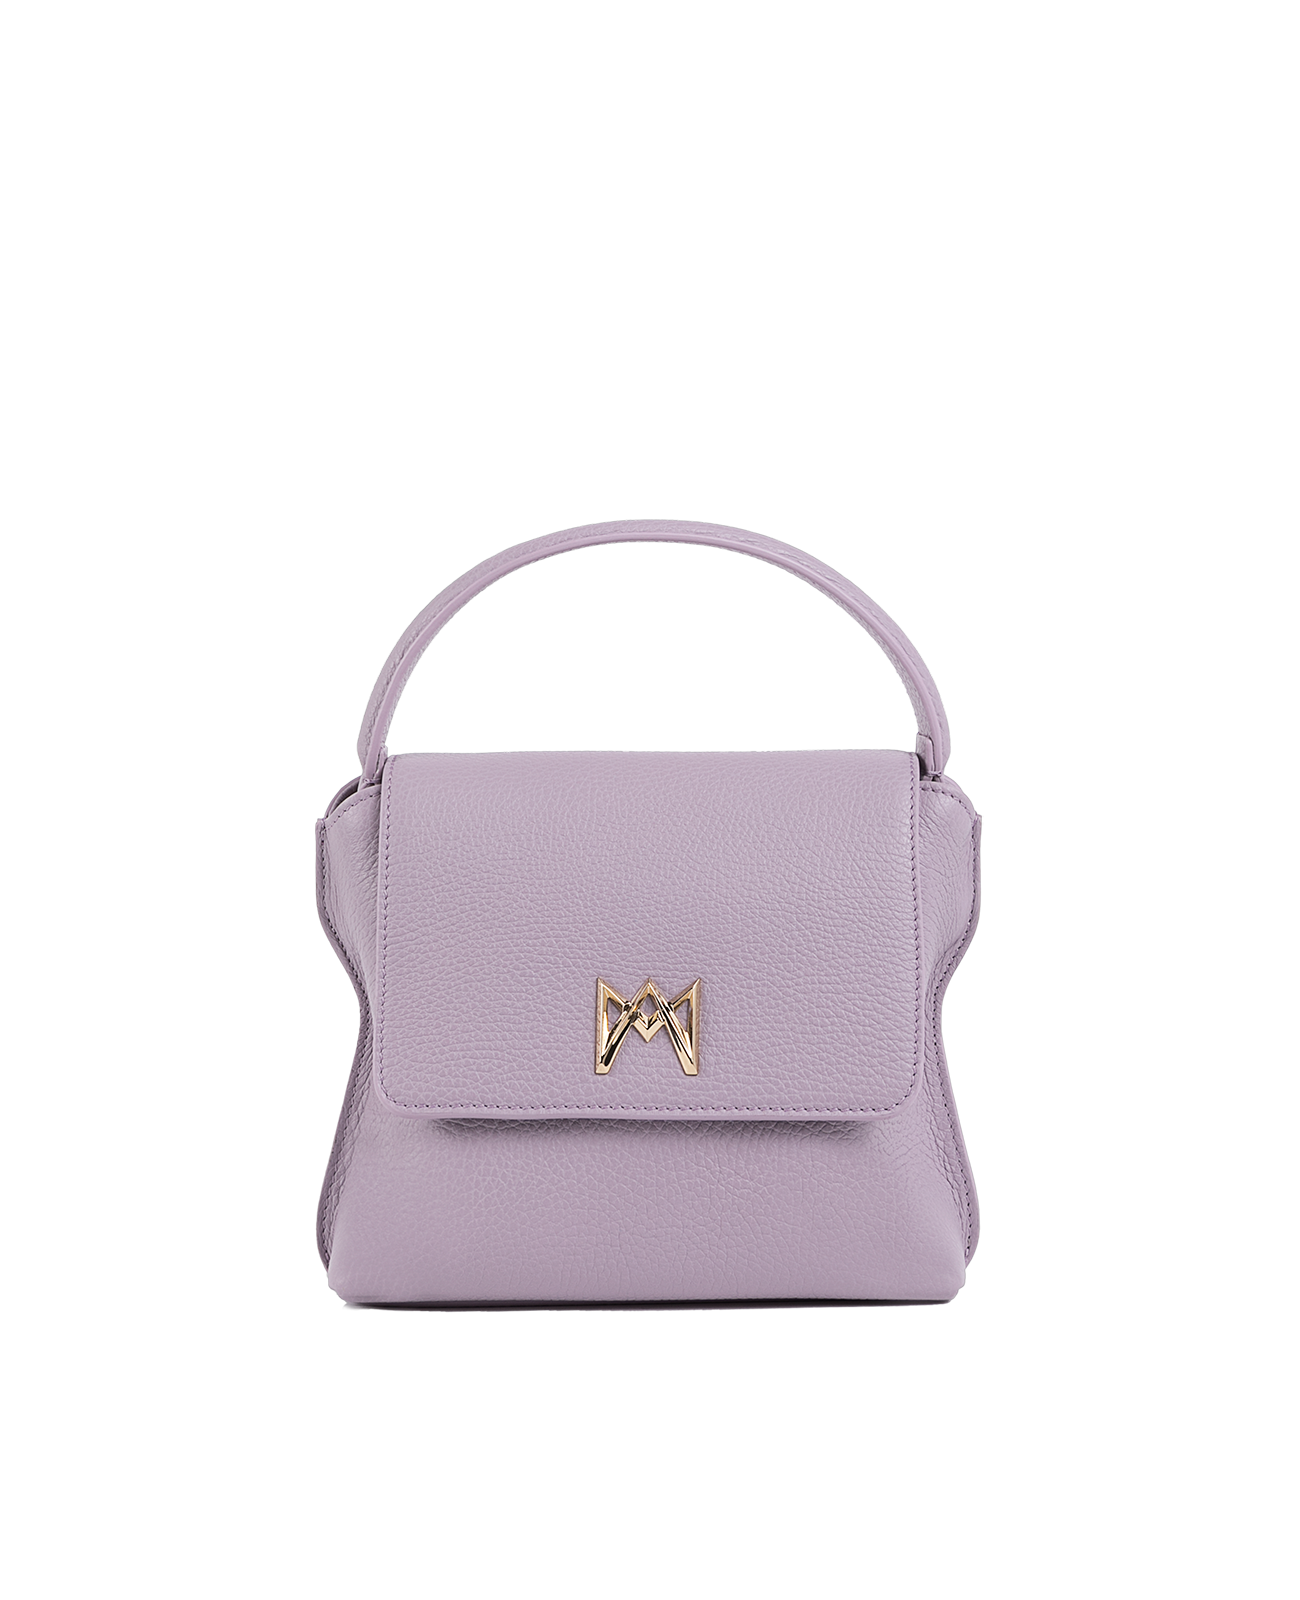 Cross-body bag in Italian full-grain leather, semi-aniline calf Italian leather with detachable shoulder strap.Three compartments, zip pocket in the back compartment. Magnetic flap closure with logo. Color: Lavender. Size:Medium